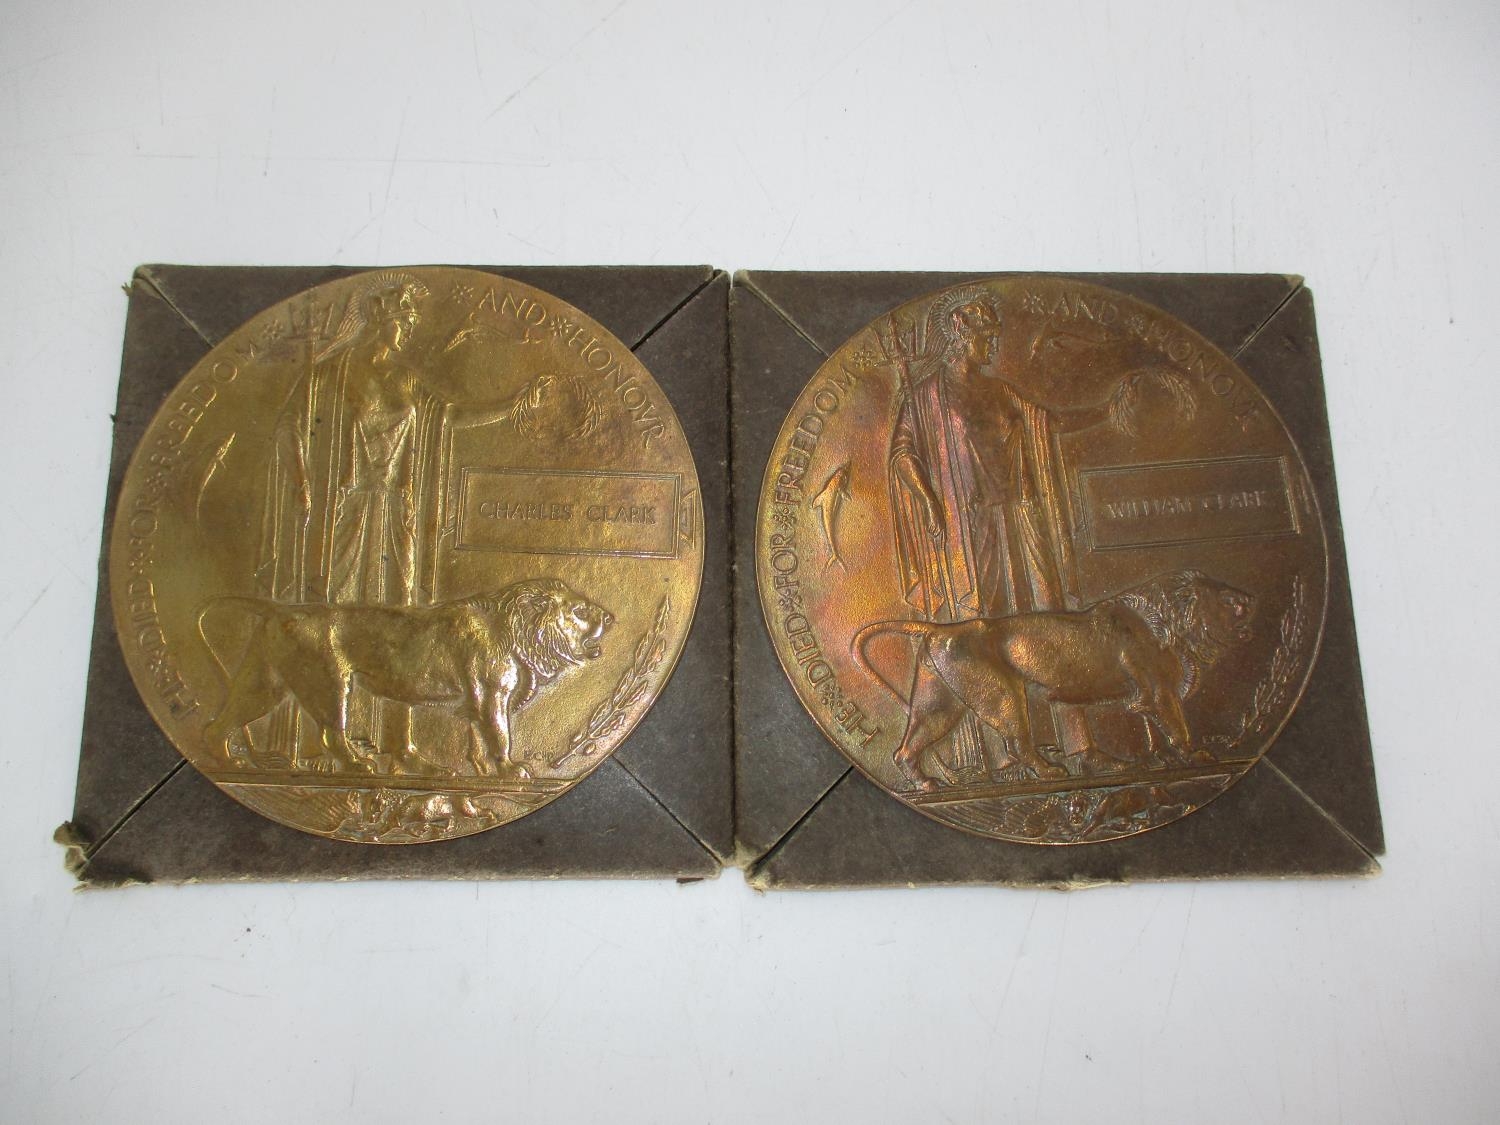 Family Pair of WWI Bronze Death Plaques/Pennies to Charles Clark and William Clark